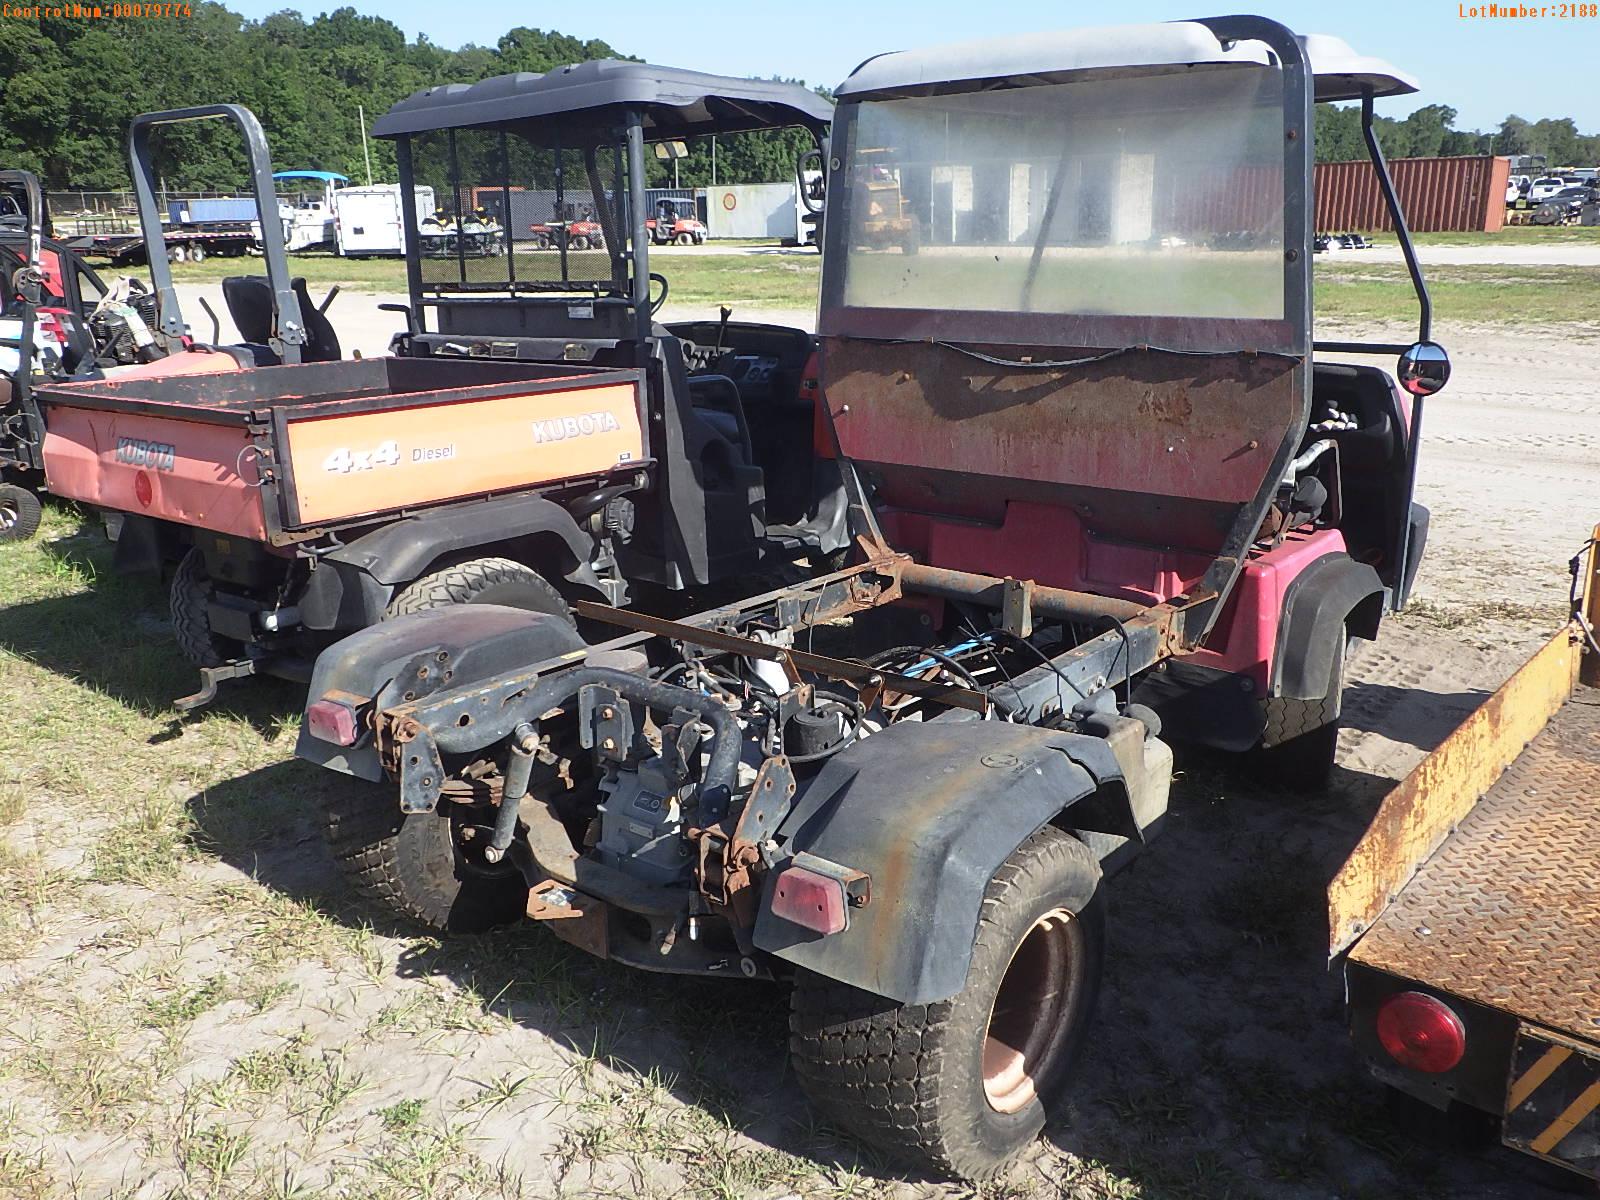 5-02188 (Equip.-Utility vehicle)  Seller: Gov-City Of Clearwater TORO 07369 SIDE